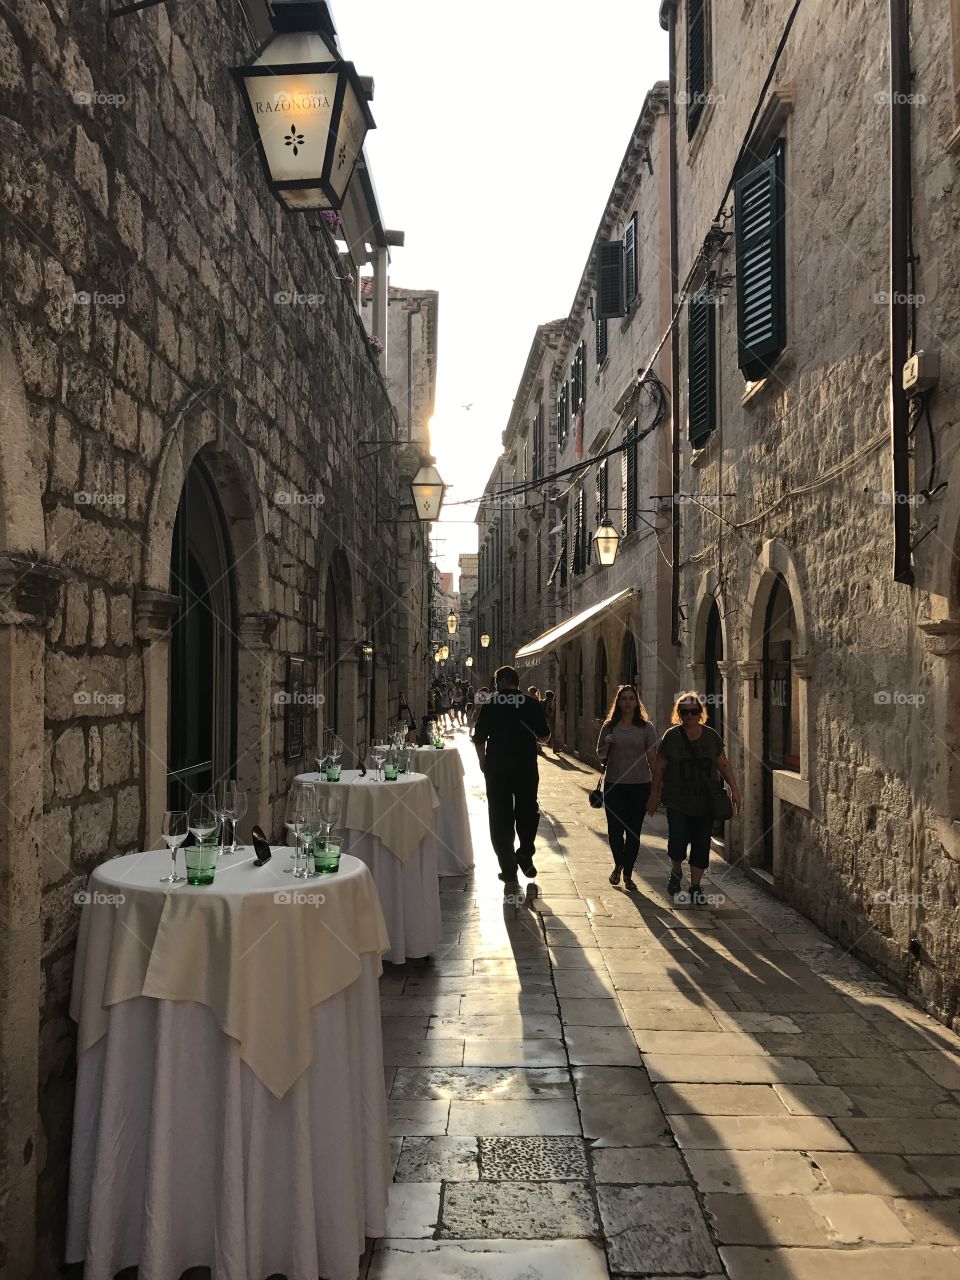 The narrow city streets of Old City, Dubrovnik 